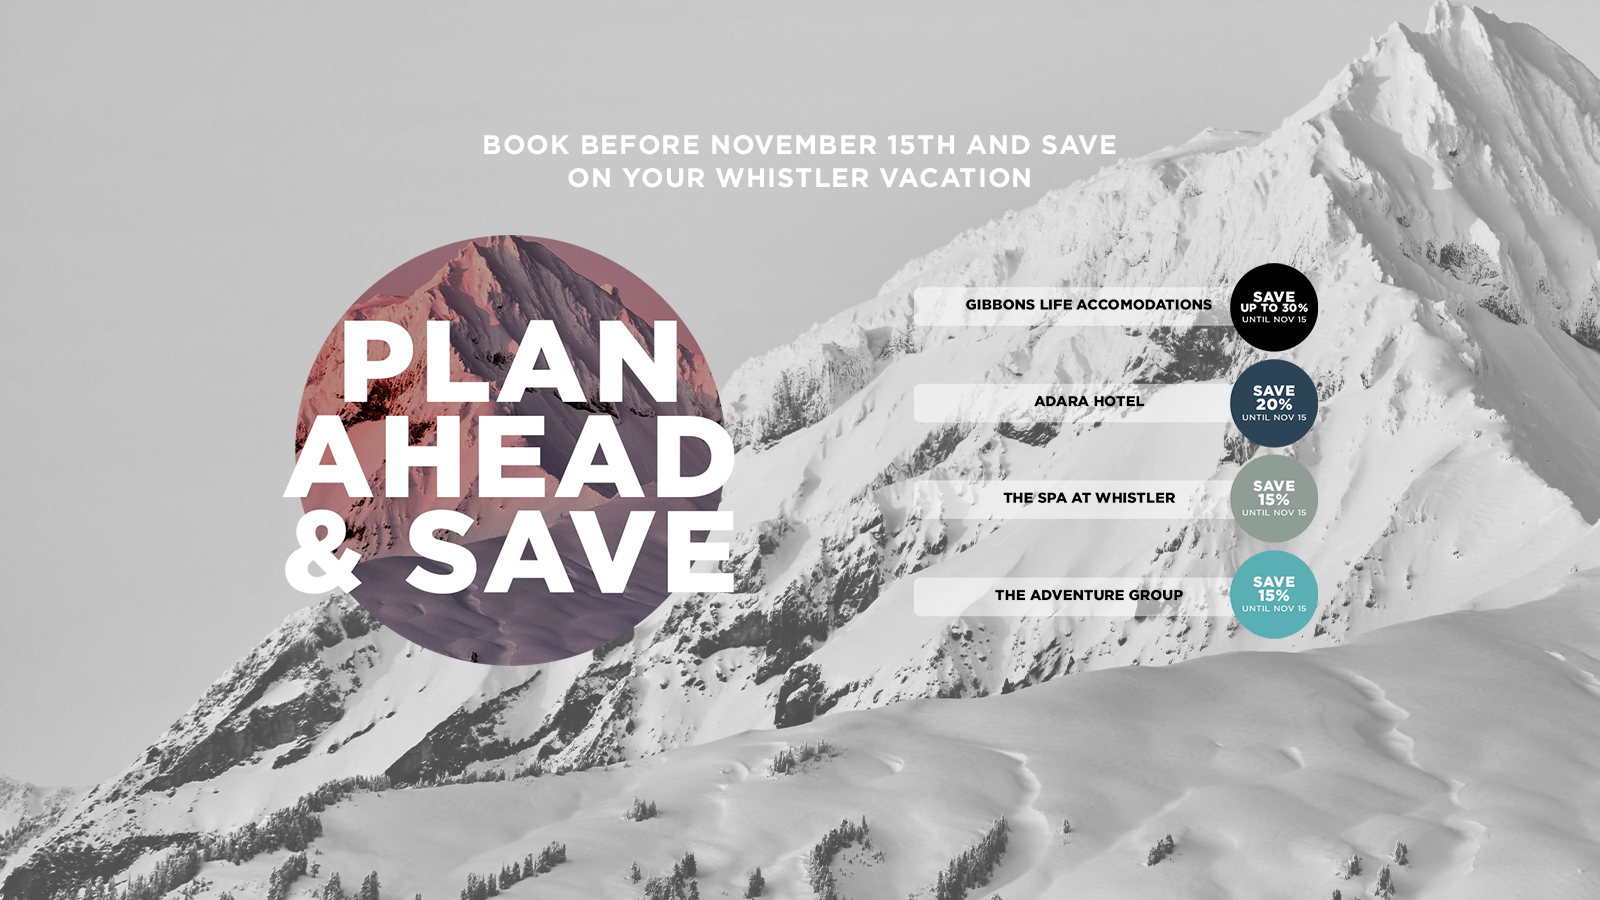 Plan Ahead & Save on Whistler Vacations